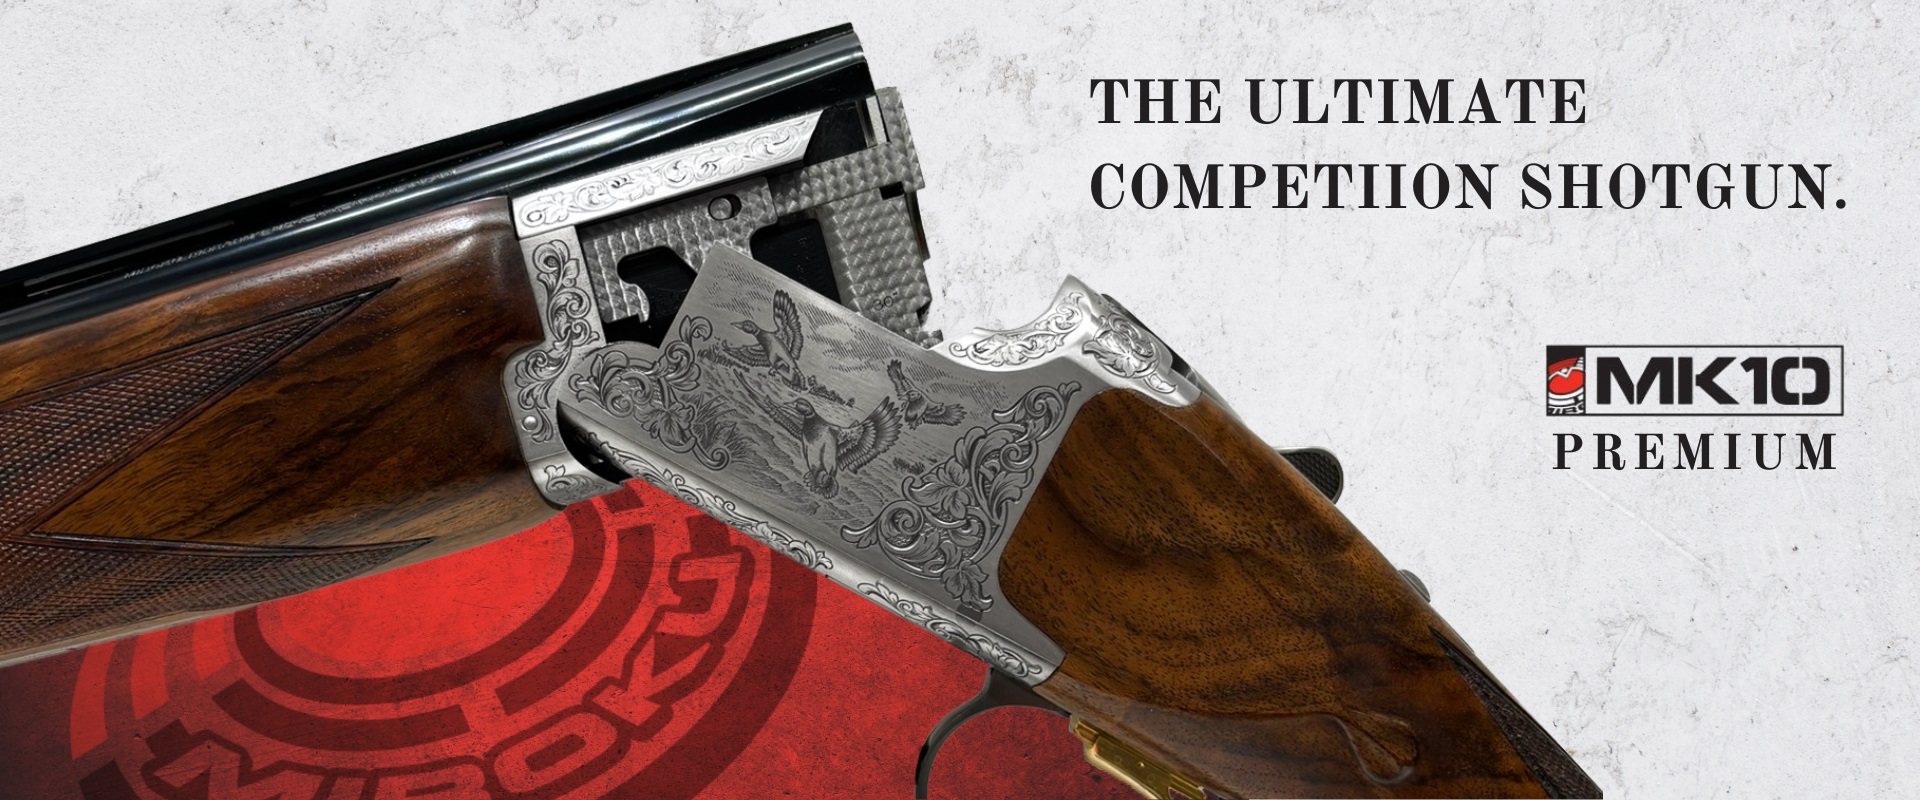 The ultimate competition shotgun